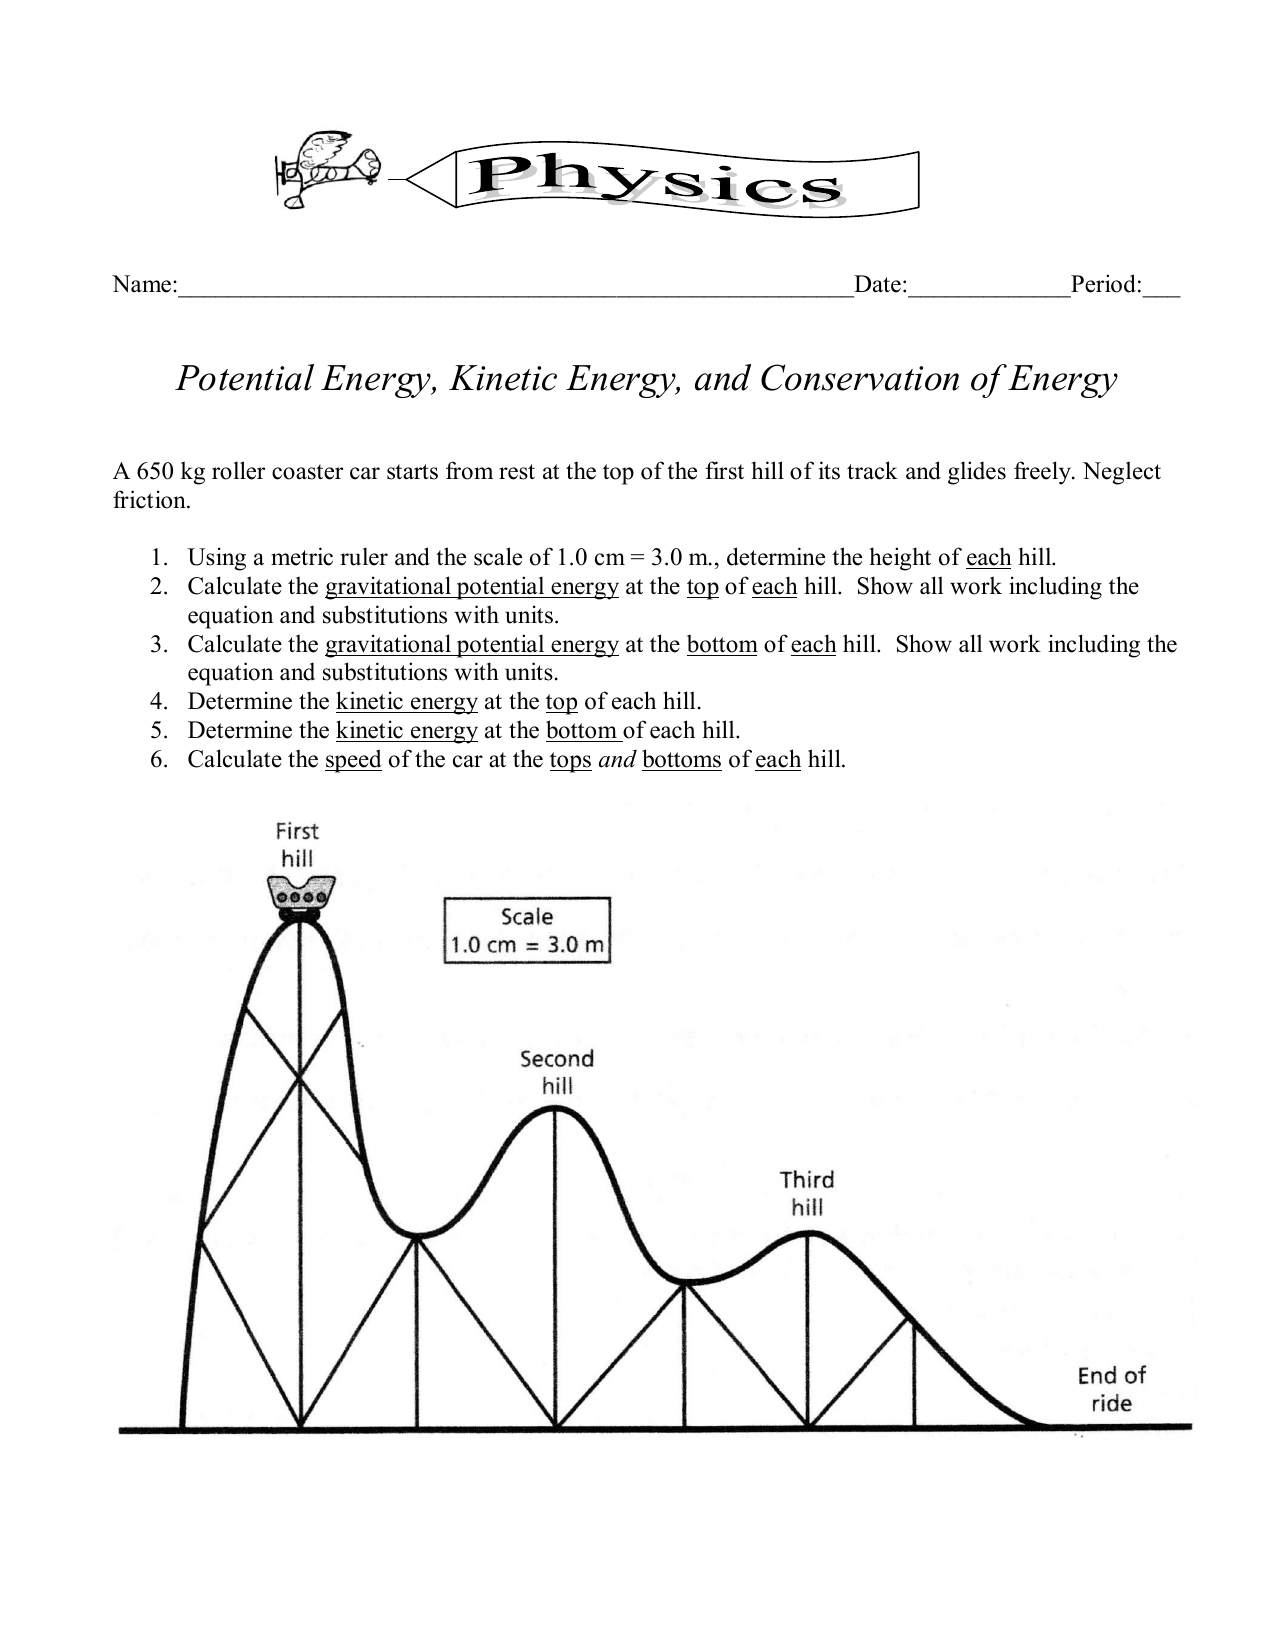 chapter 3 critical thinking positions along a roller coaster answers